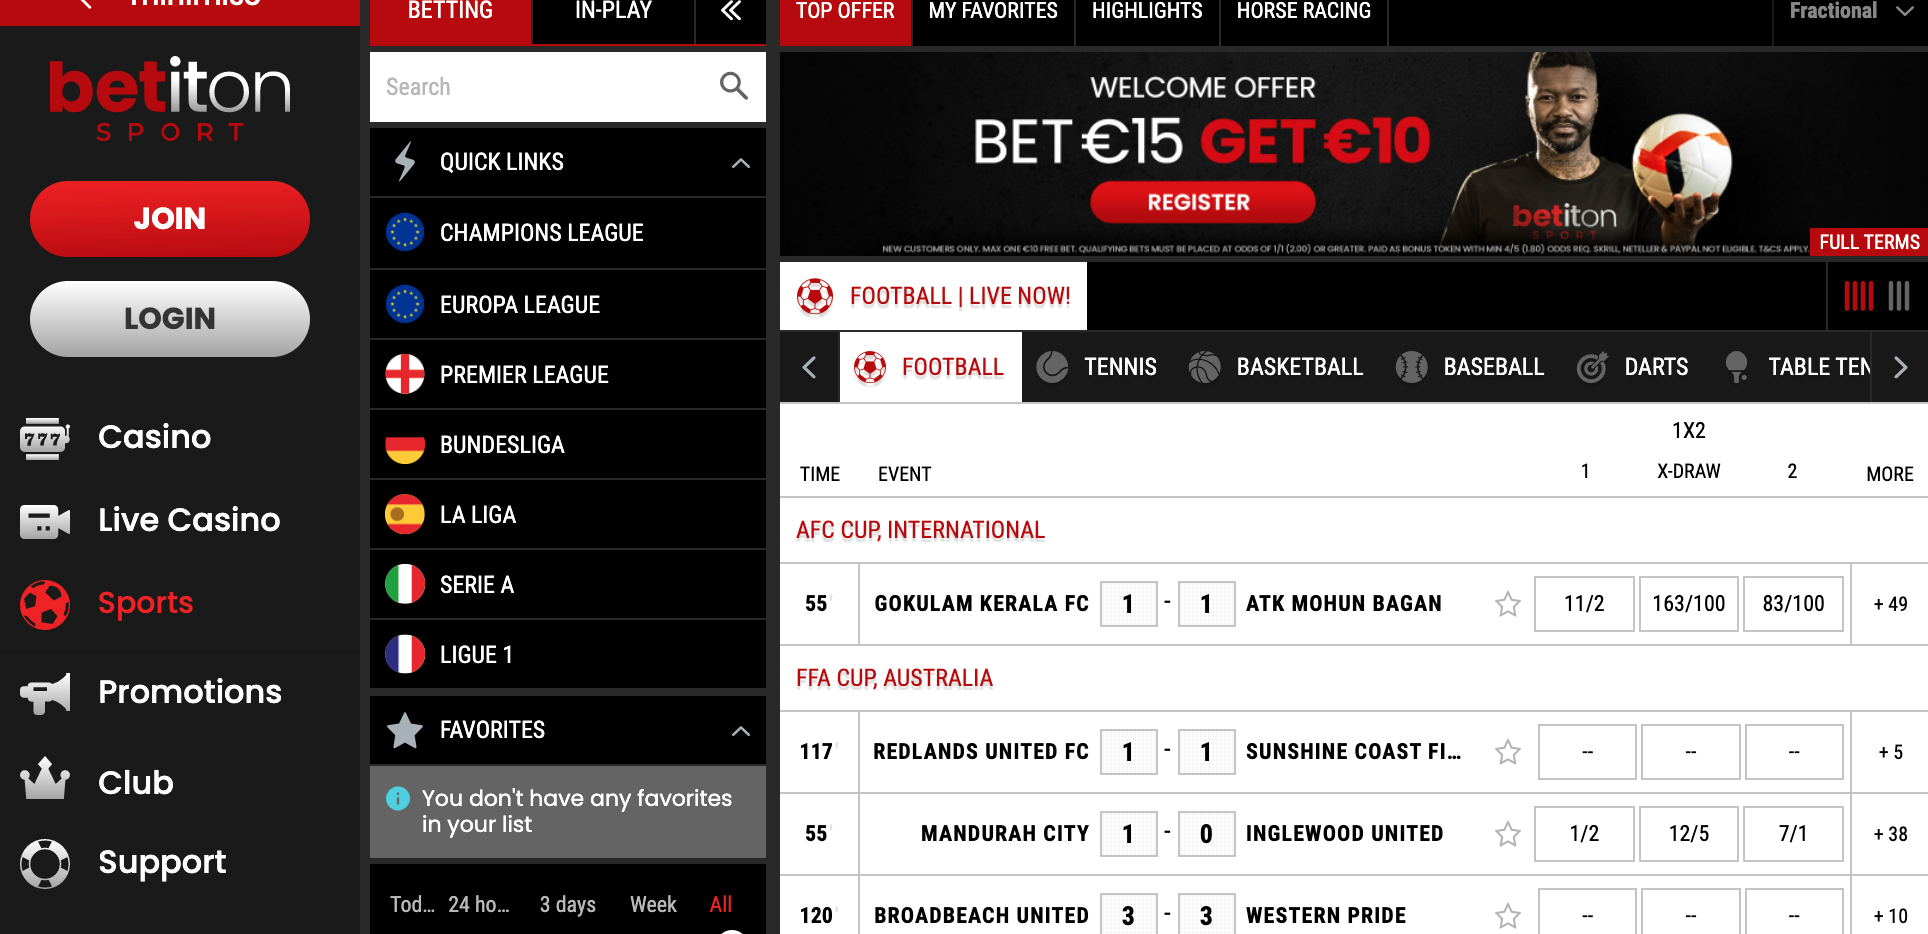 Betiton Review, Free Bets and Offers: Mobile and Desktop Features